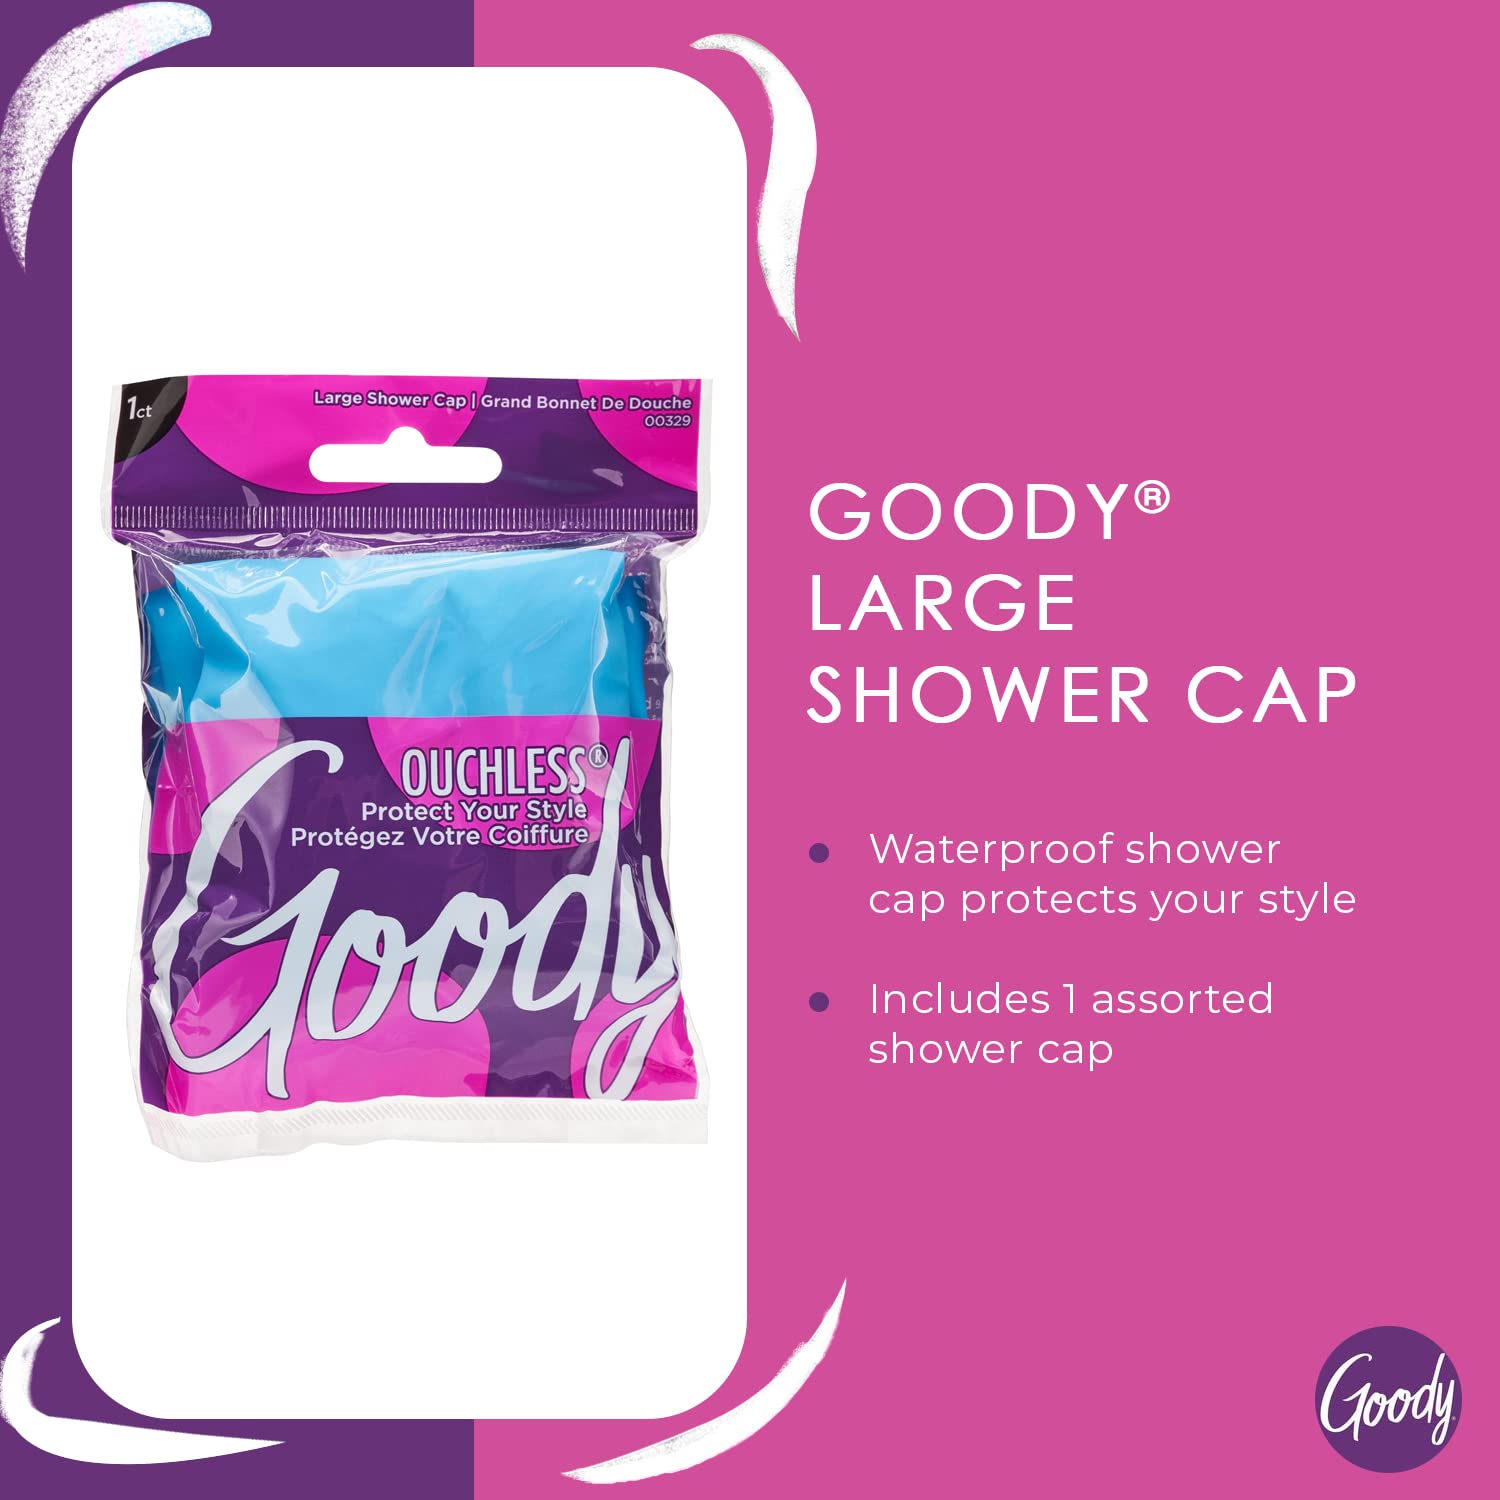 Goody Styling Essentials Durable Waterproof Shower Cap, 1 Count (Colors May Vary)